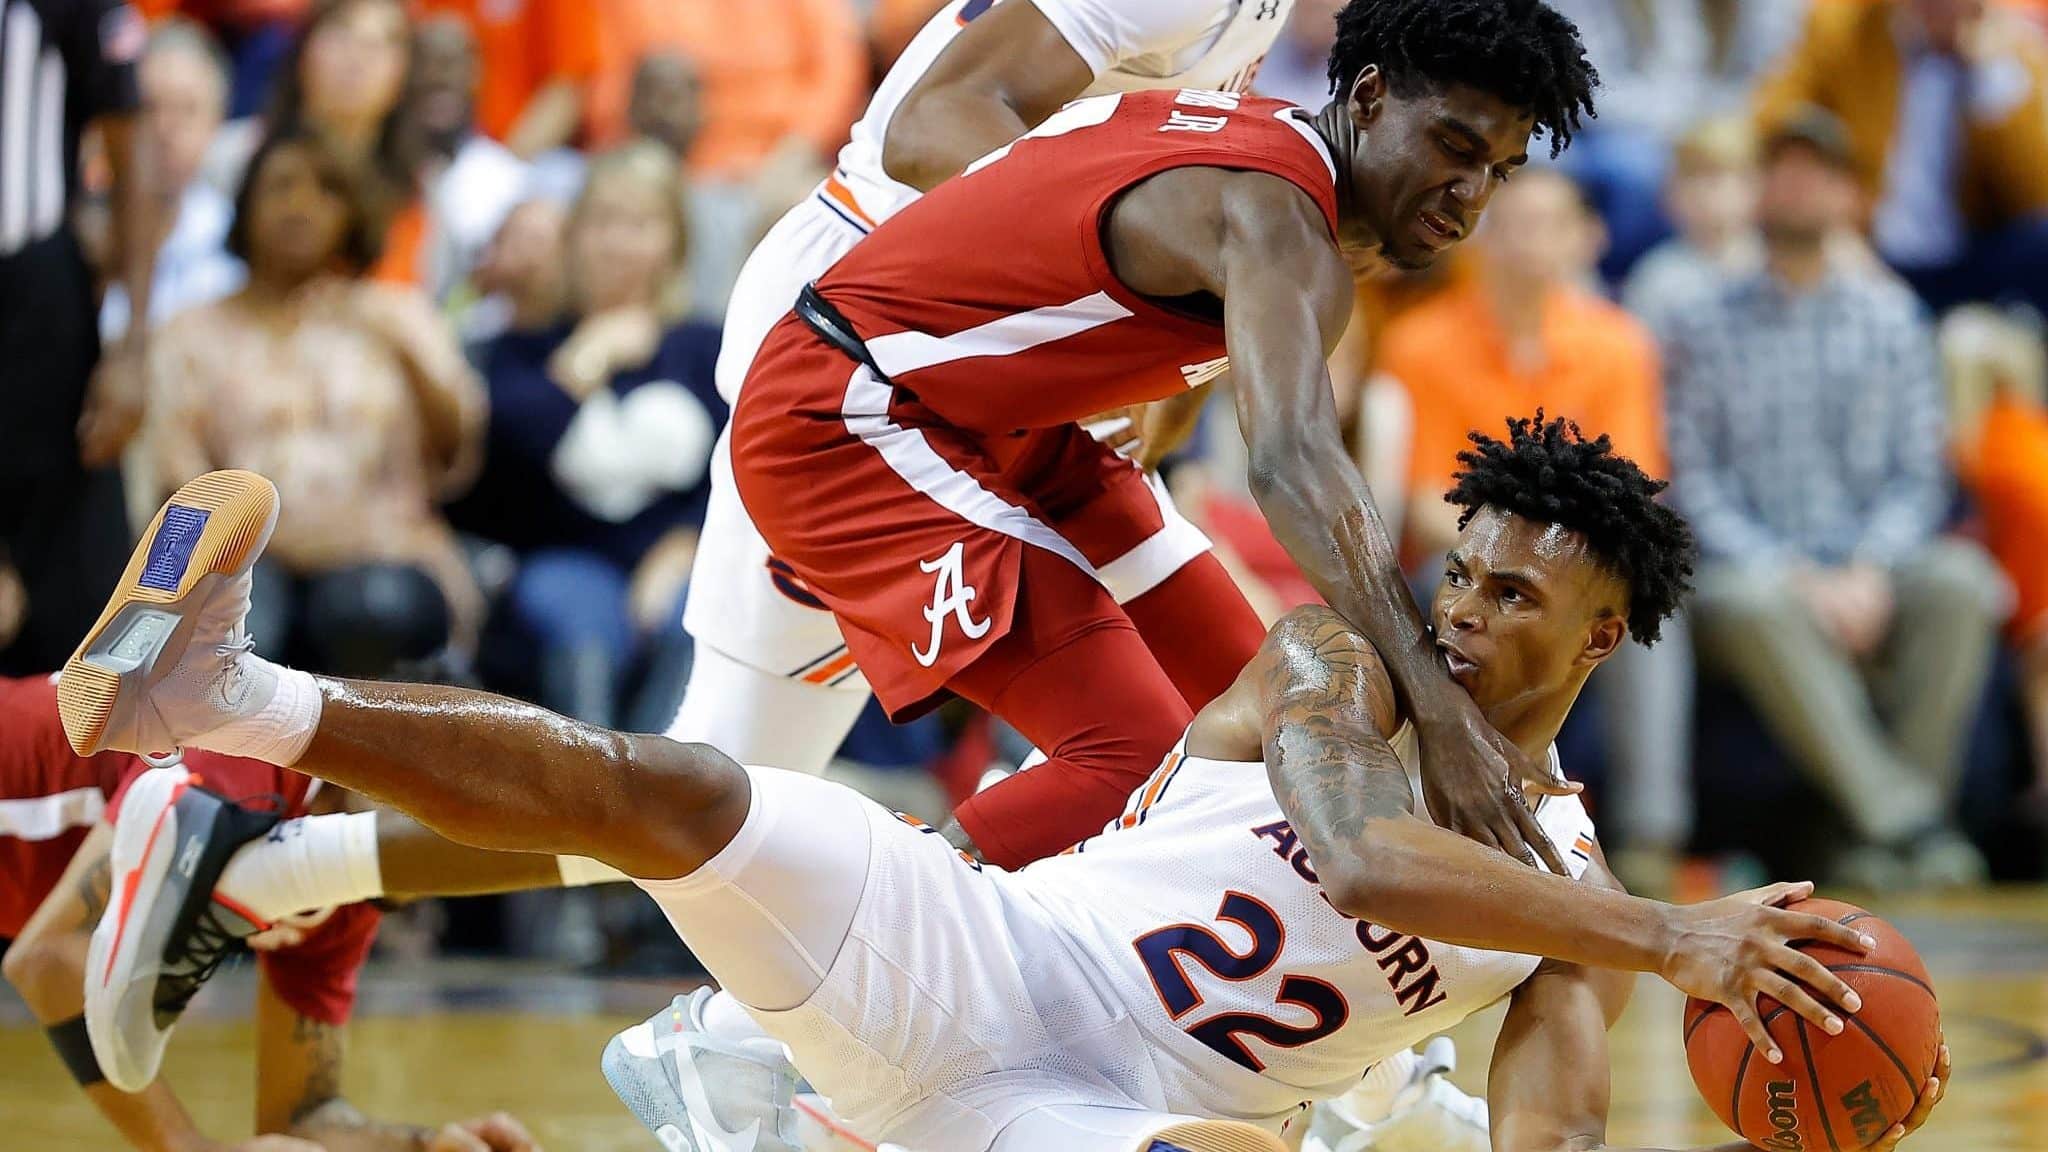 AUBURN, ALABAMA - FEBRUARY 12: Allen Flanigan #22 of the Auburn Tigers grabs a loose ball against Kira Lewis Jr. #2 of the Alabama Crimson Tide in the second half at Auburn Arena on February 12, 2020 in Auburn, Alabama.